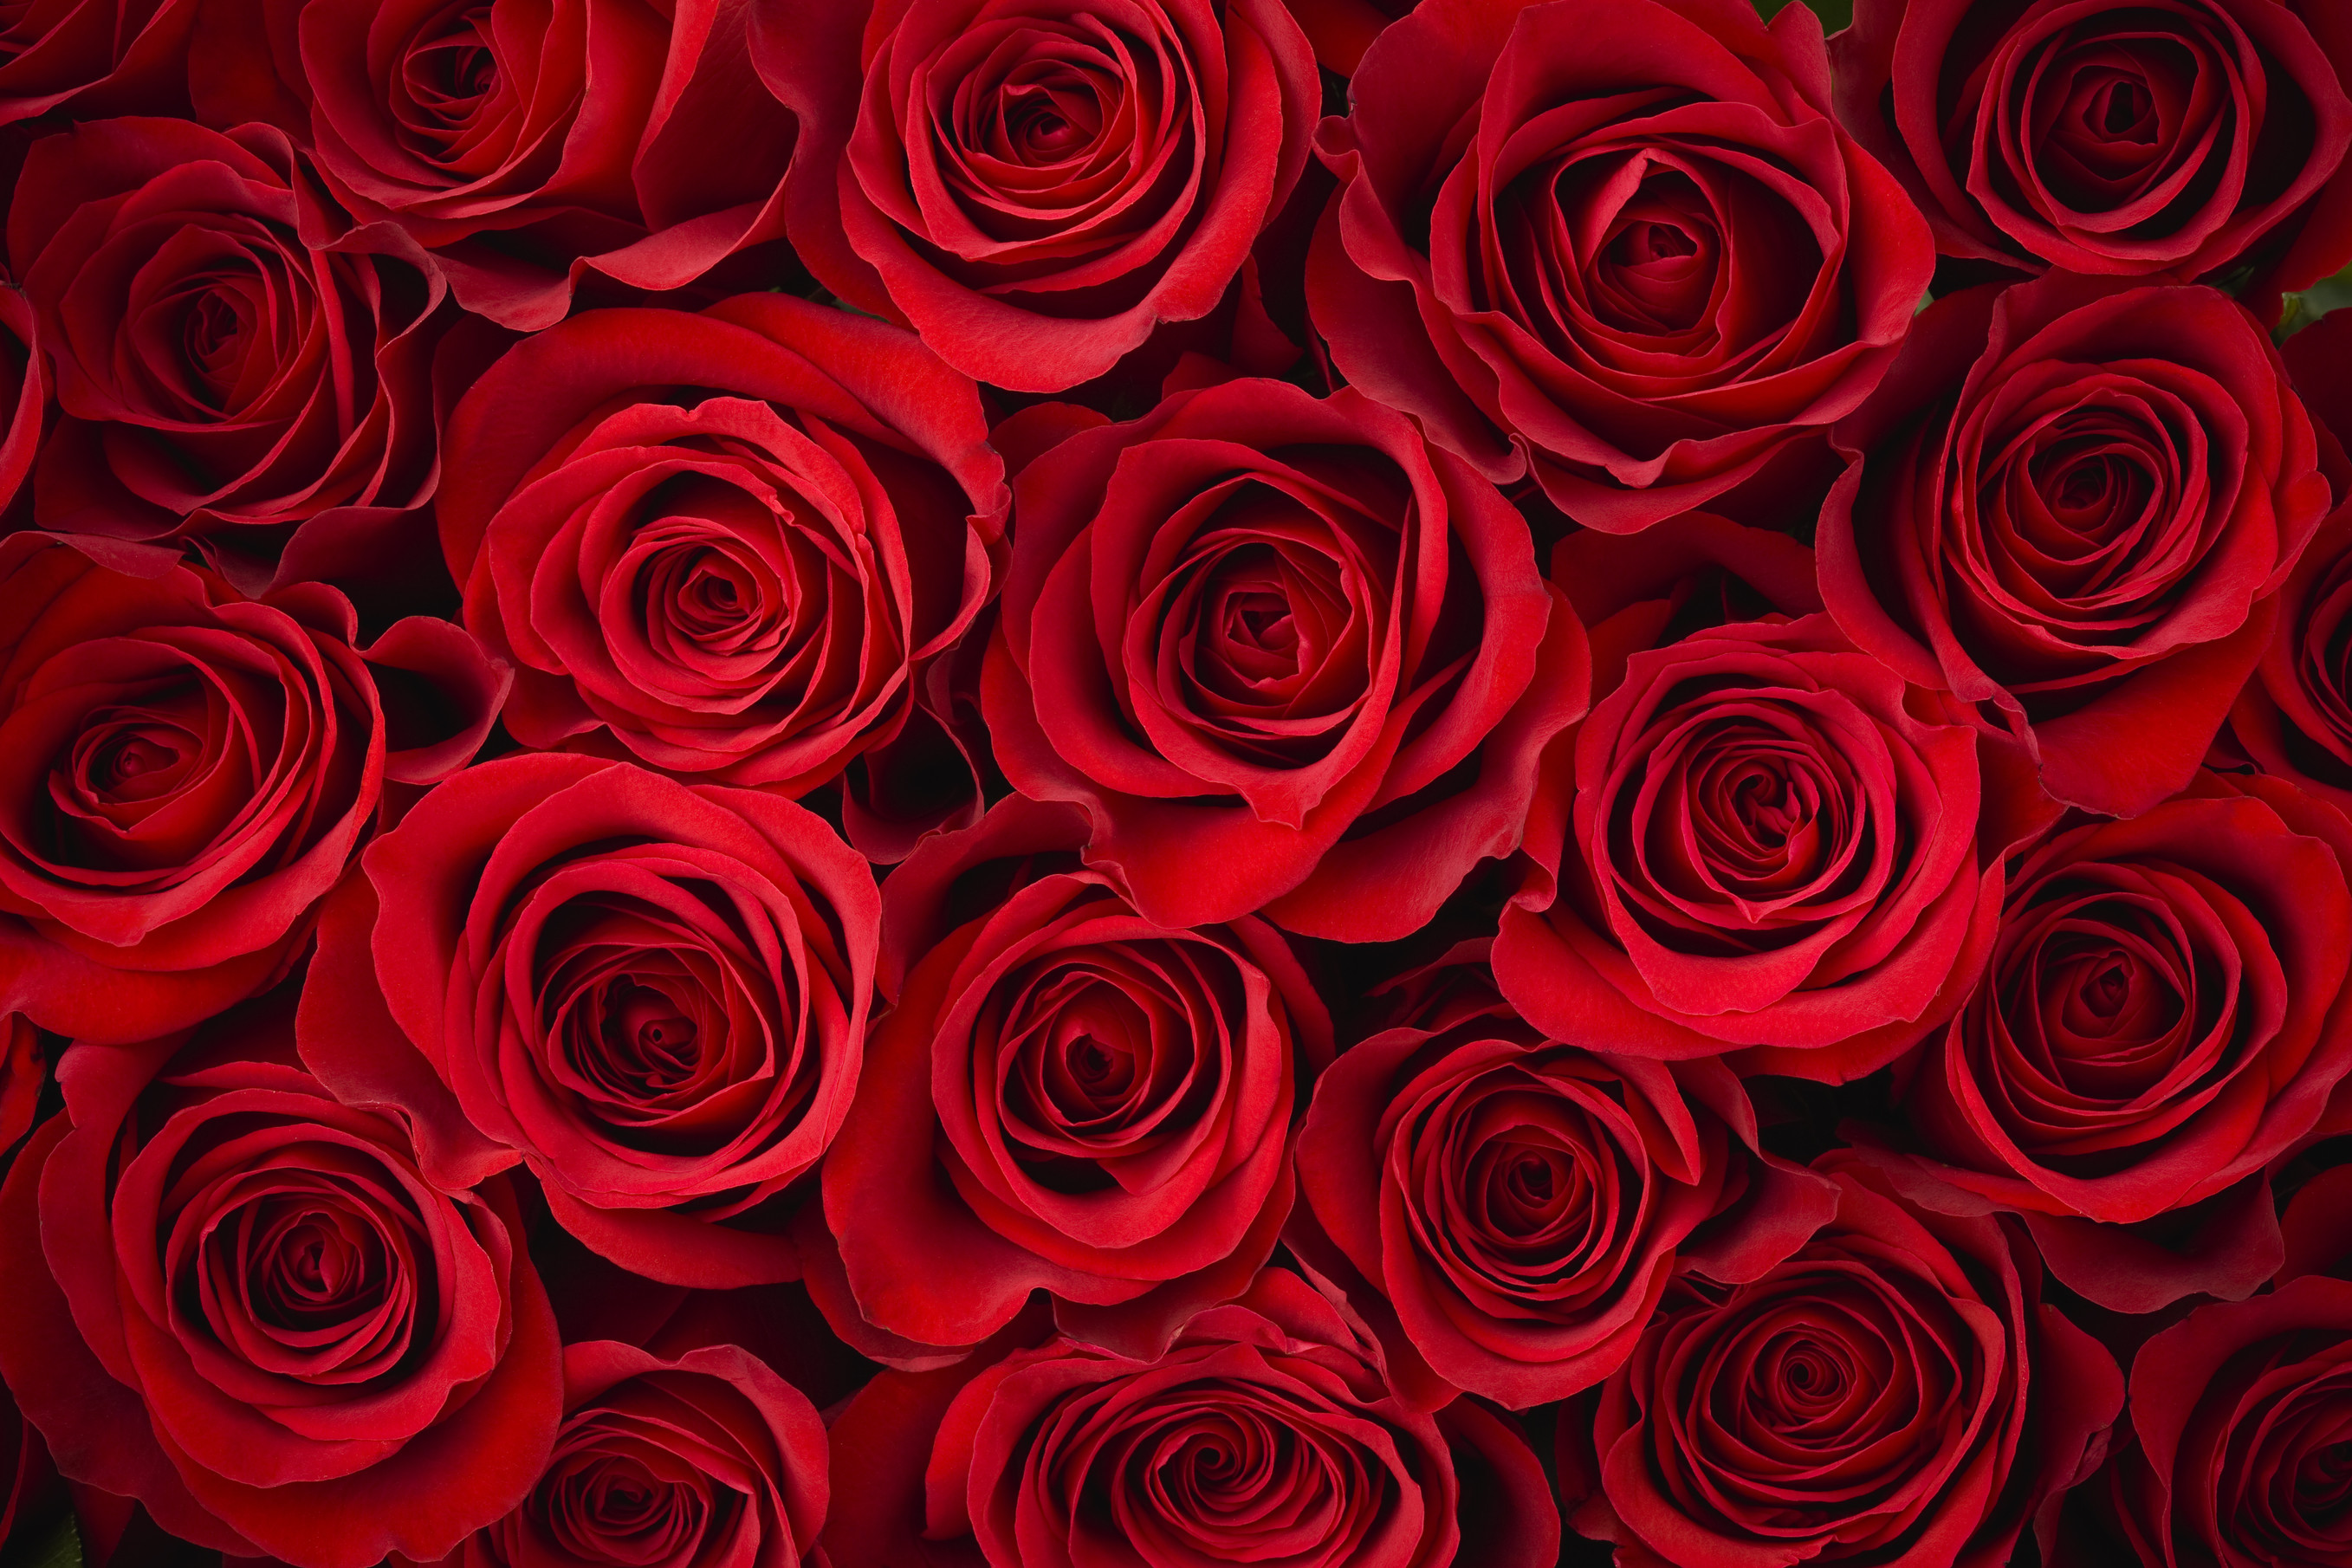 2715x1810 A close up picture of red roses, which make a stunning design for all manner